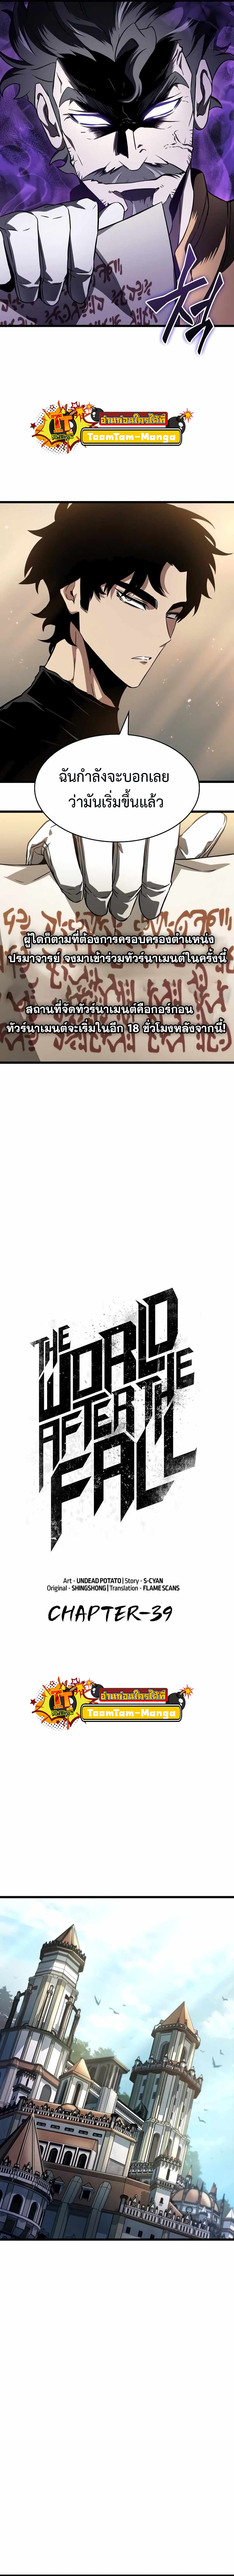 The World After the end39 (9)